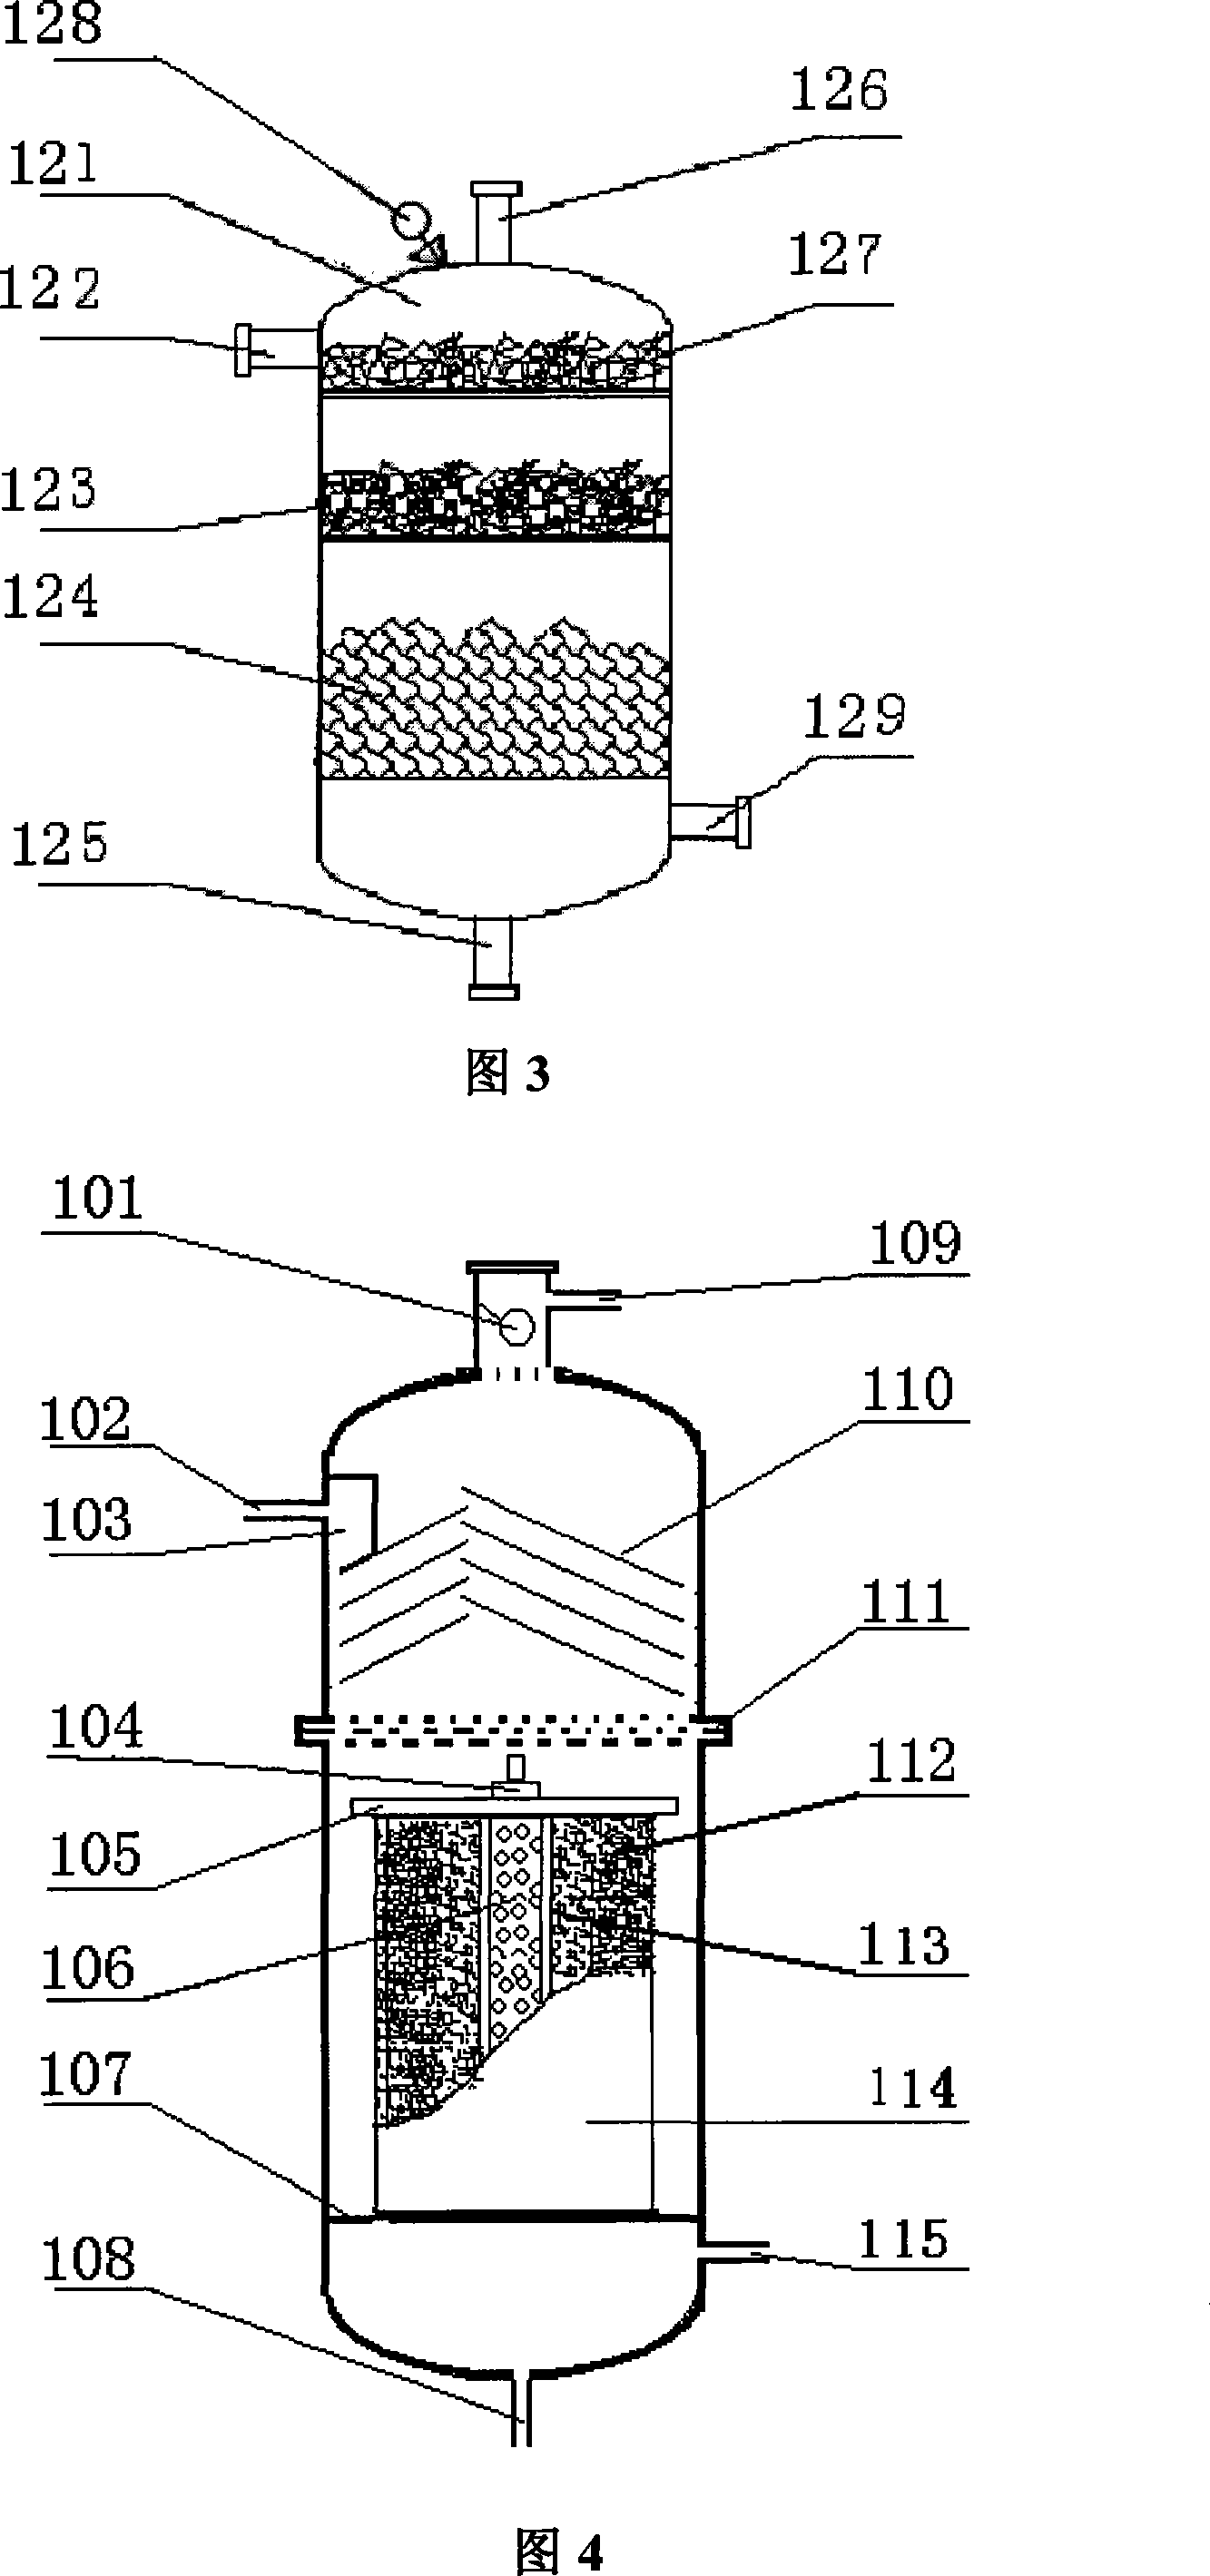 Oil-containing sewage treatment system